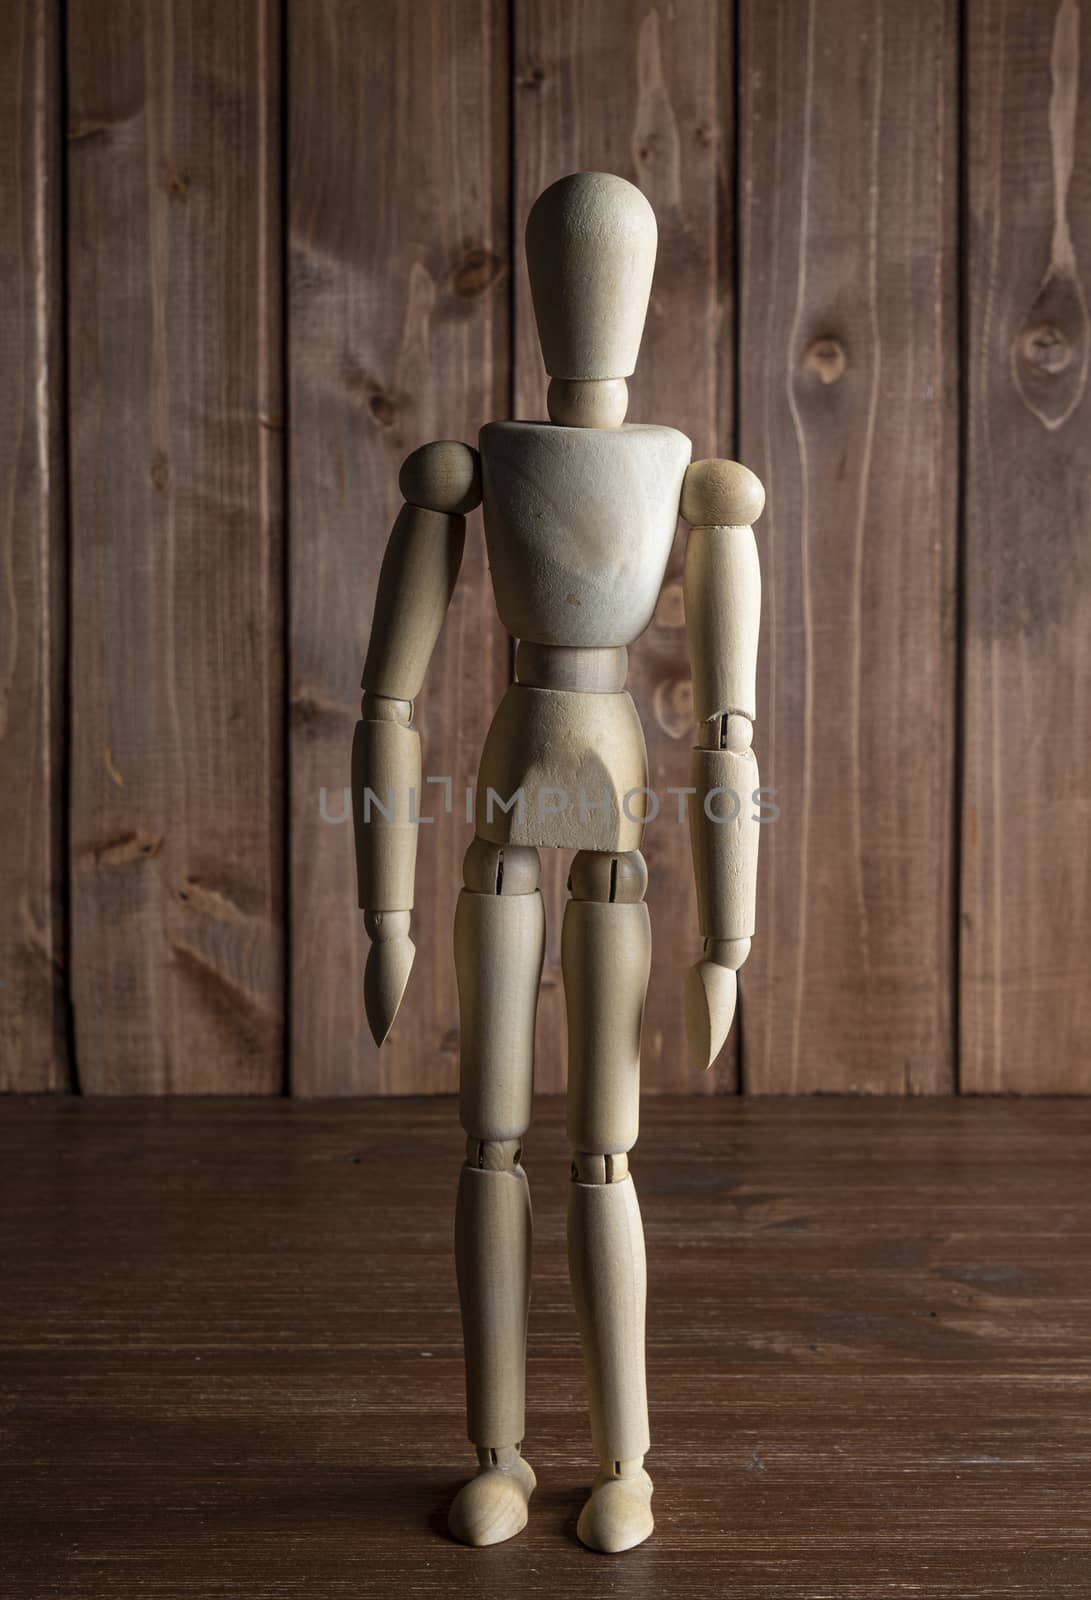 A mannequin on a wooden surface